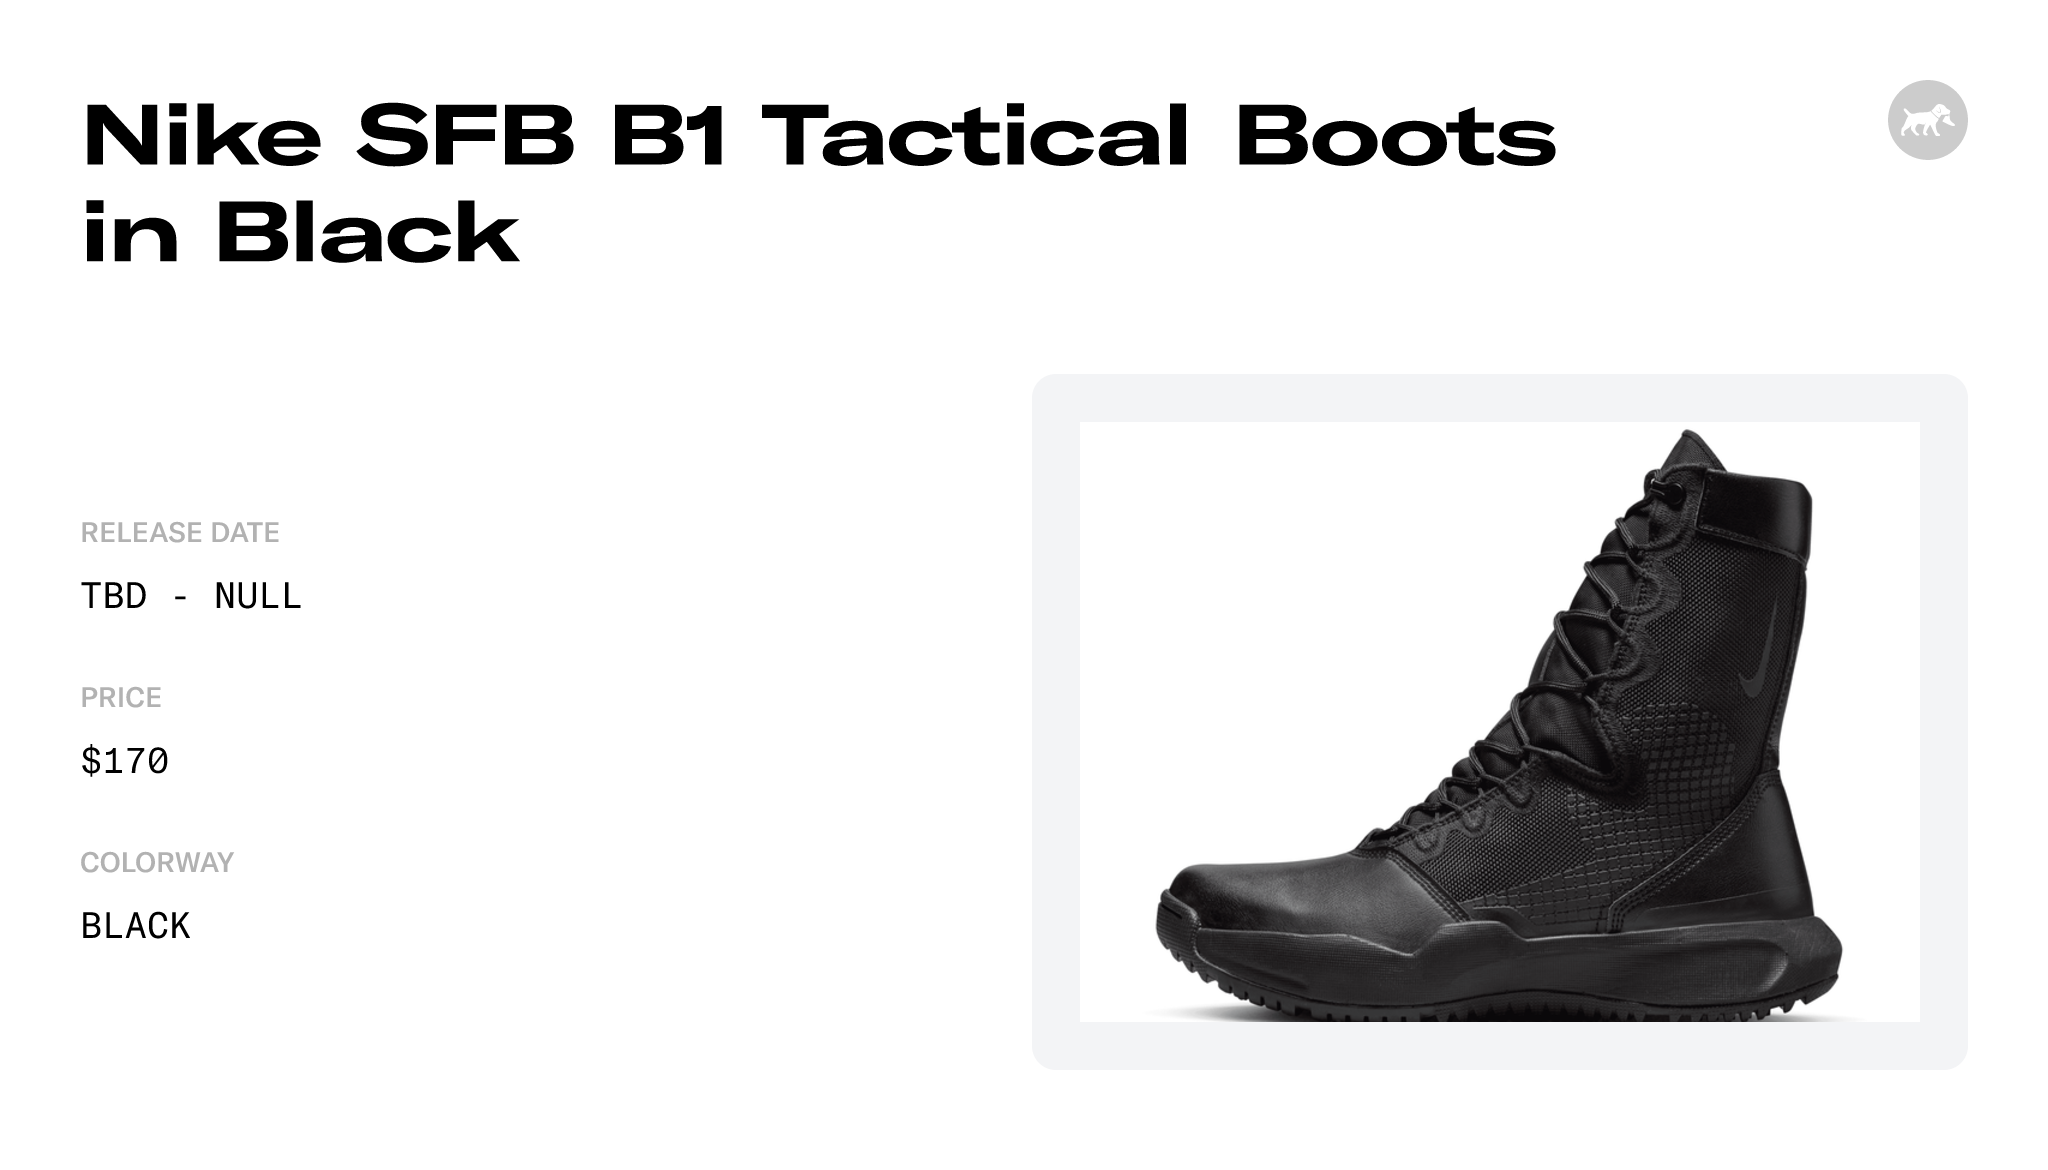 Nike SFB B1 Tactical Boots in Black - DX2117-001 Raffles and Release Date